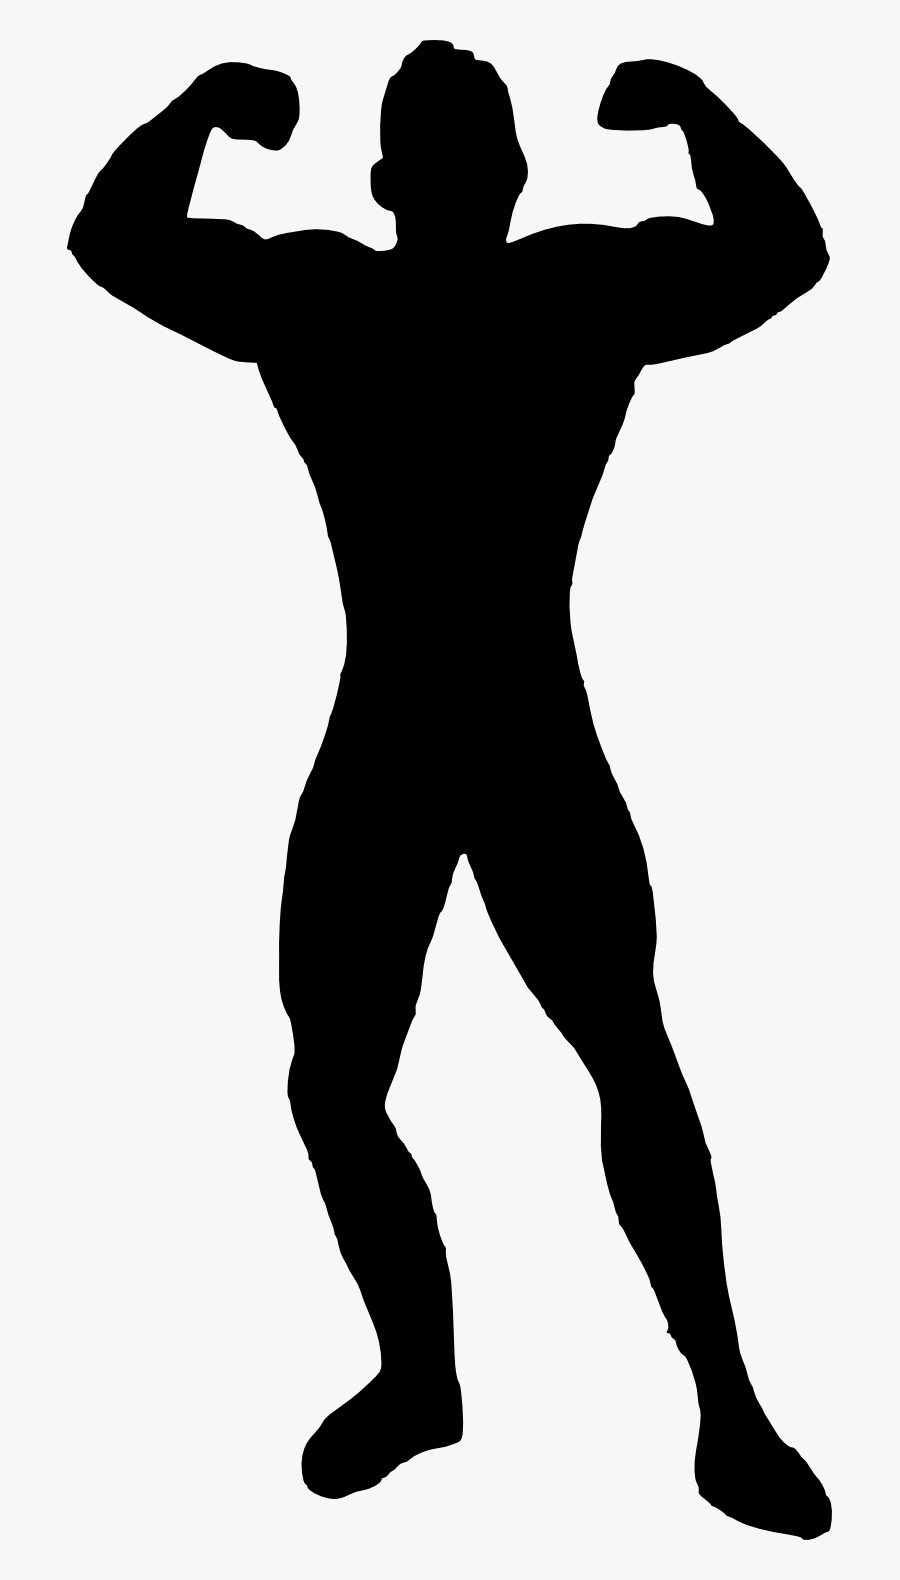 Man Body Silhouette - Muscle Man Silhouette Png, Transparent Clipart